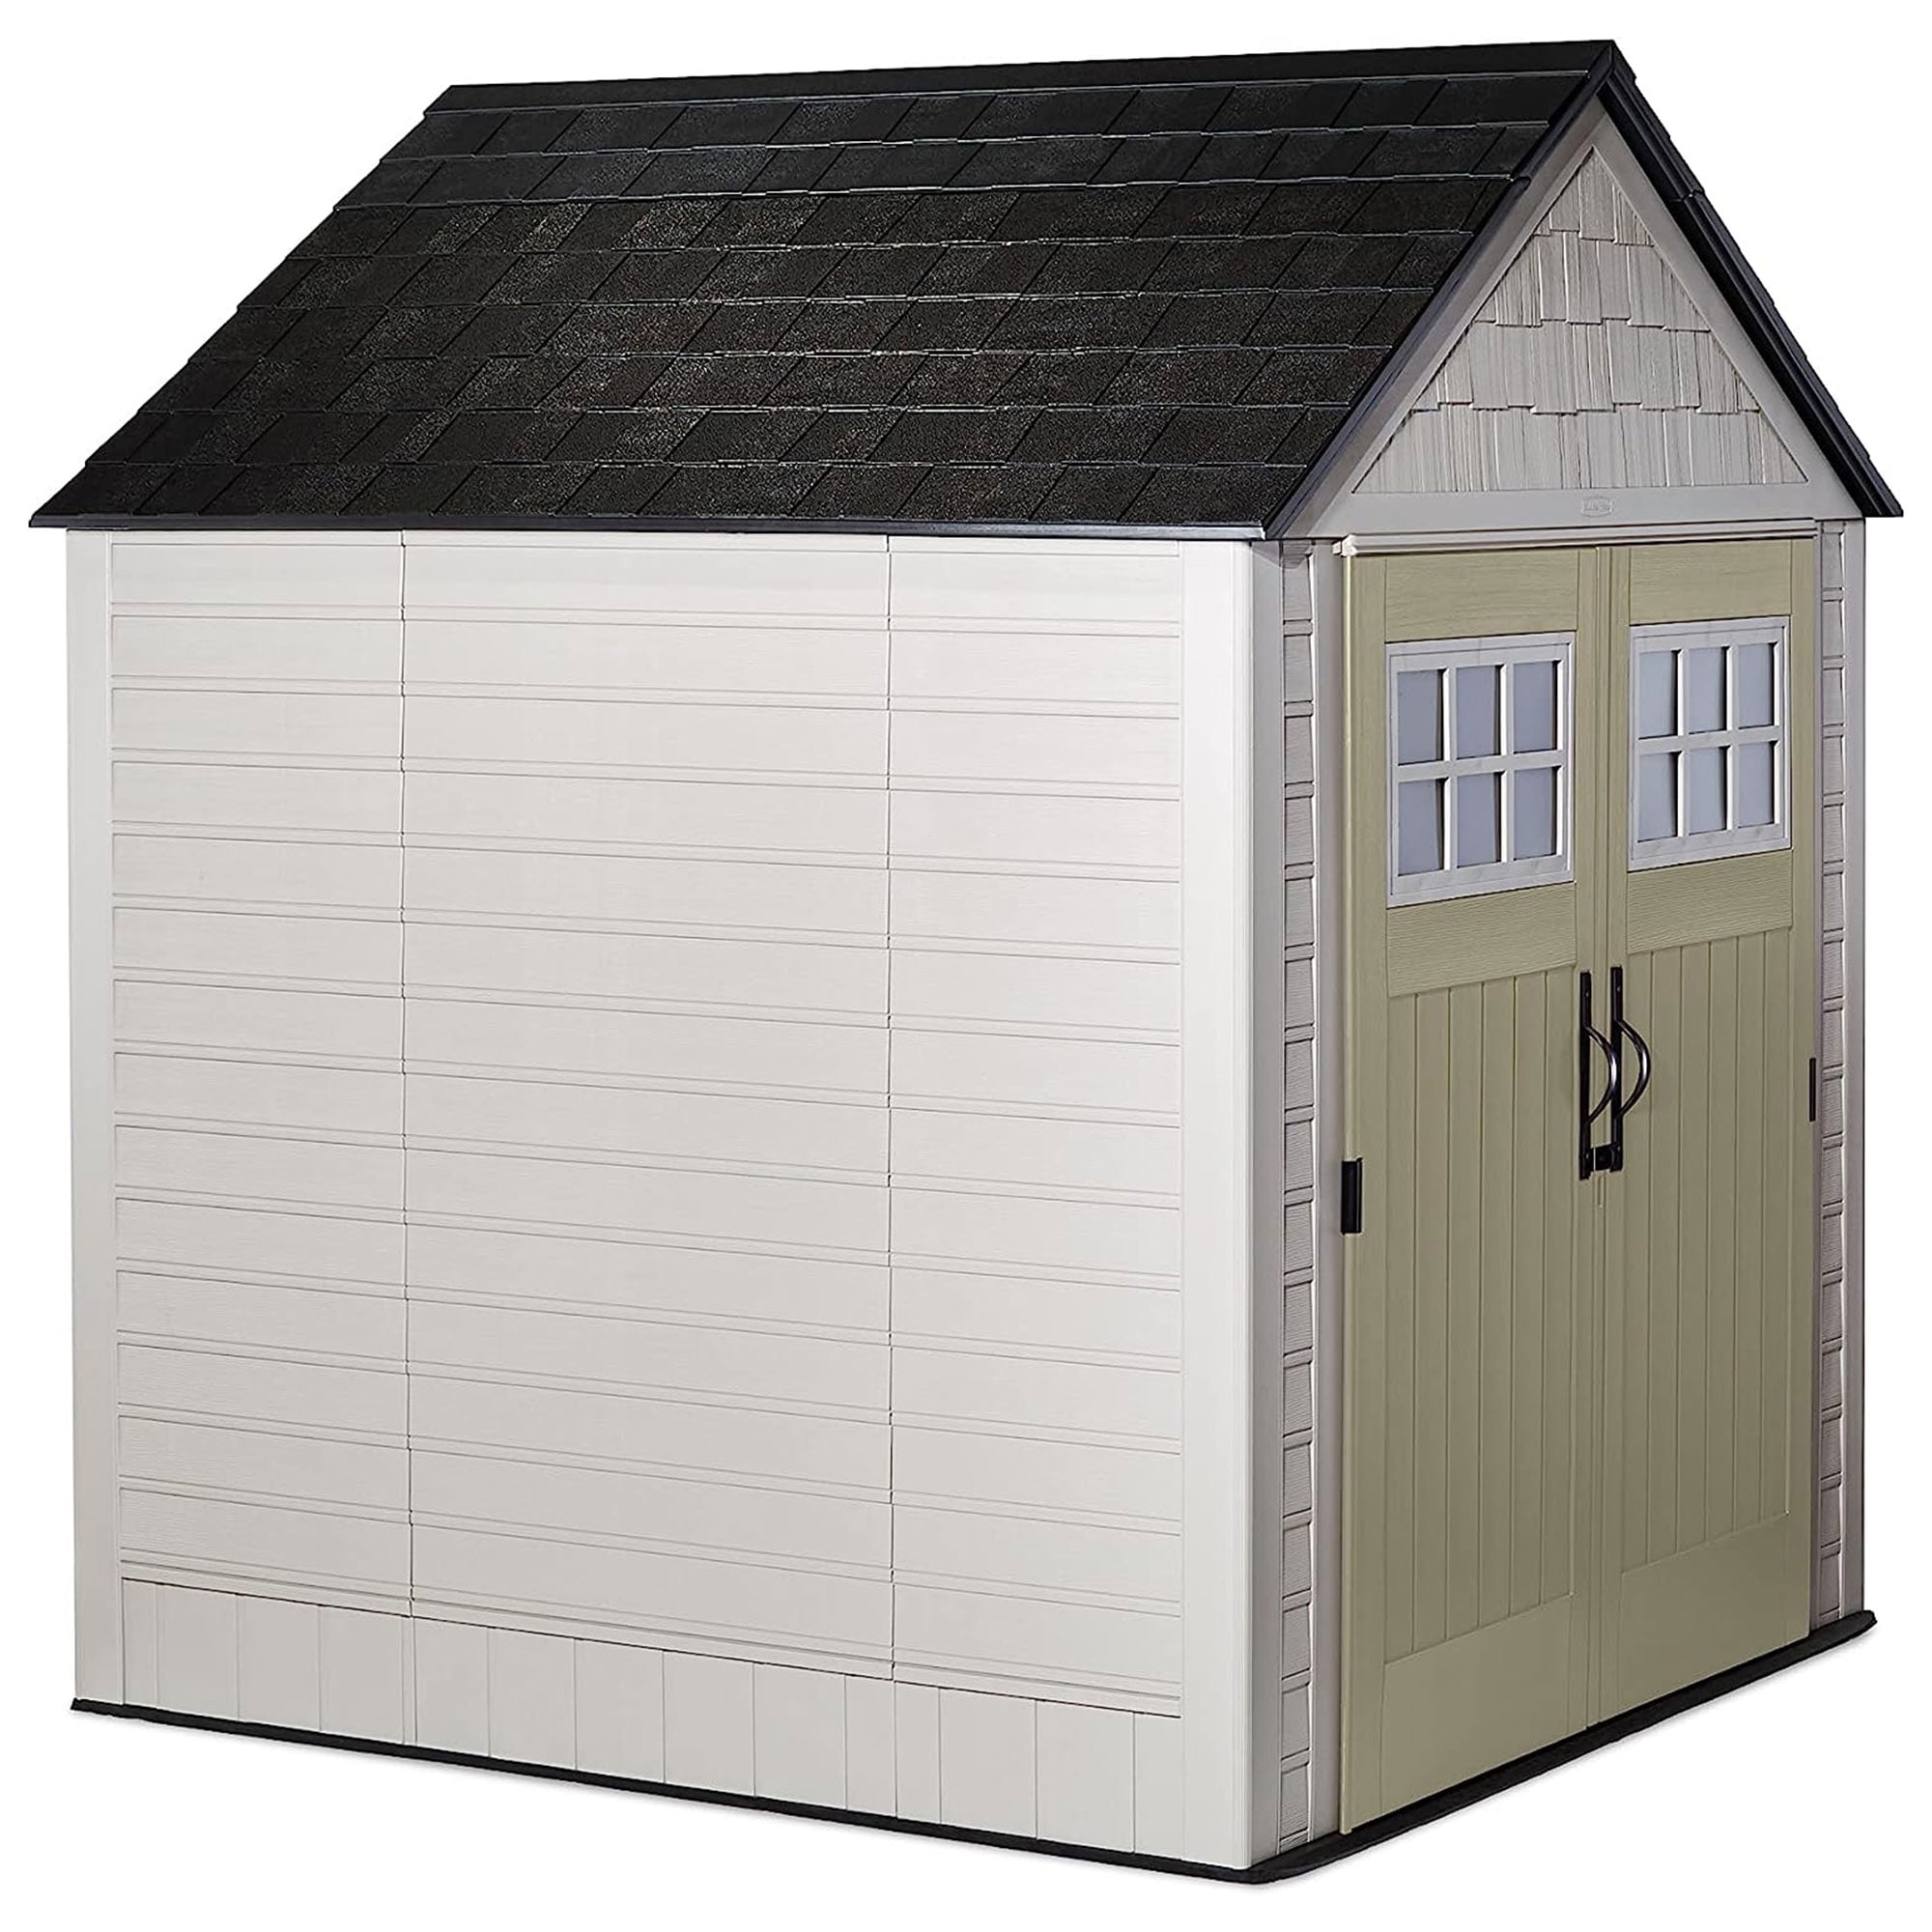 Rubbermaid 7x7 ft Durable Weather Resistant Resin Outdoor Storage Shed